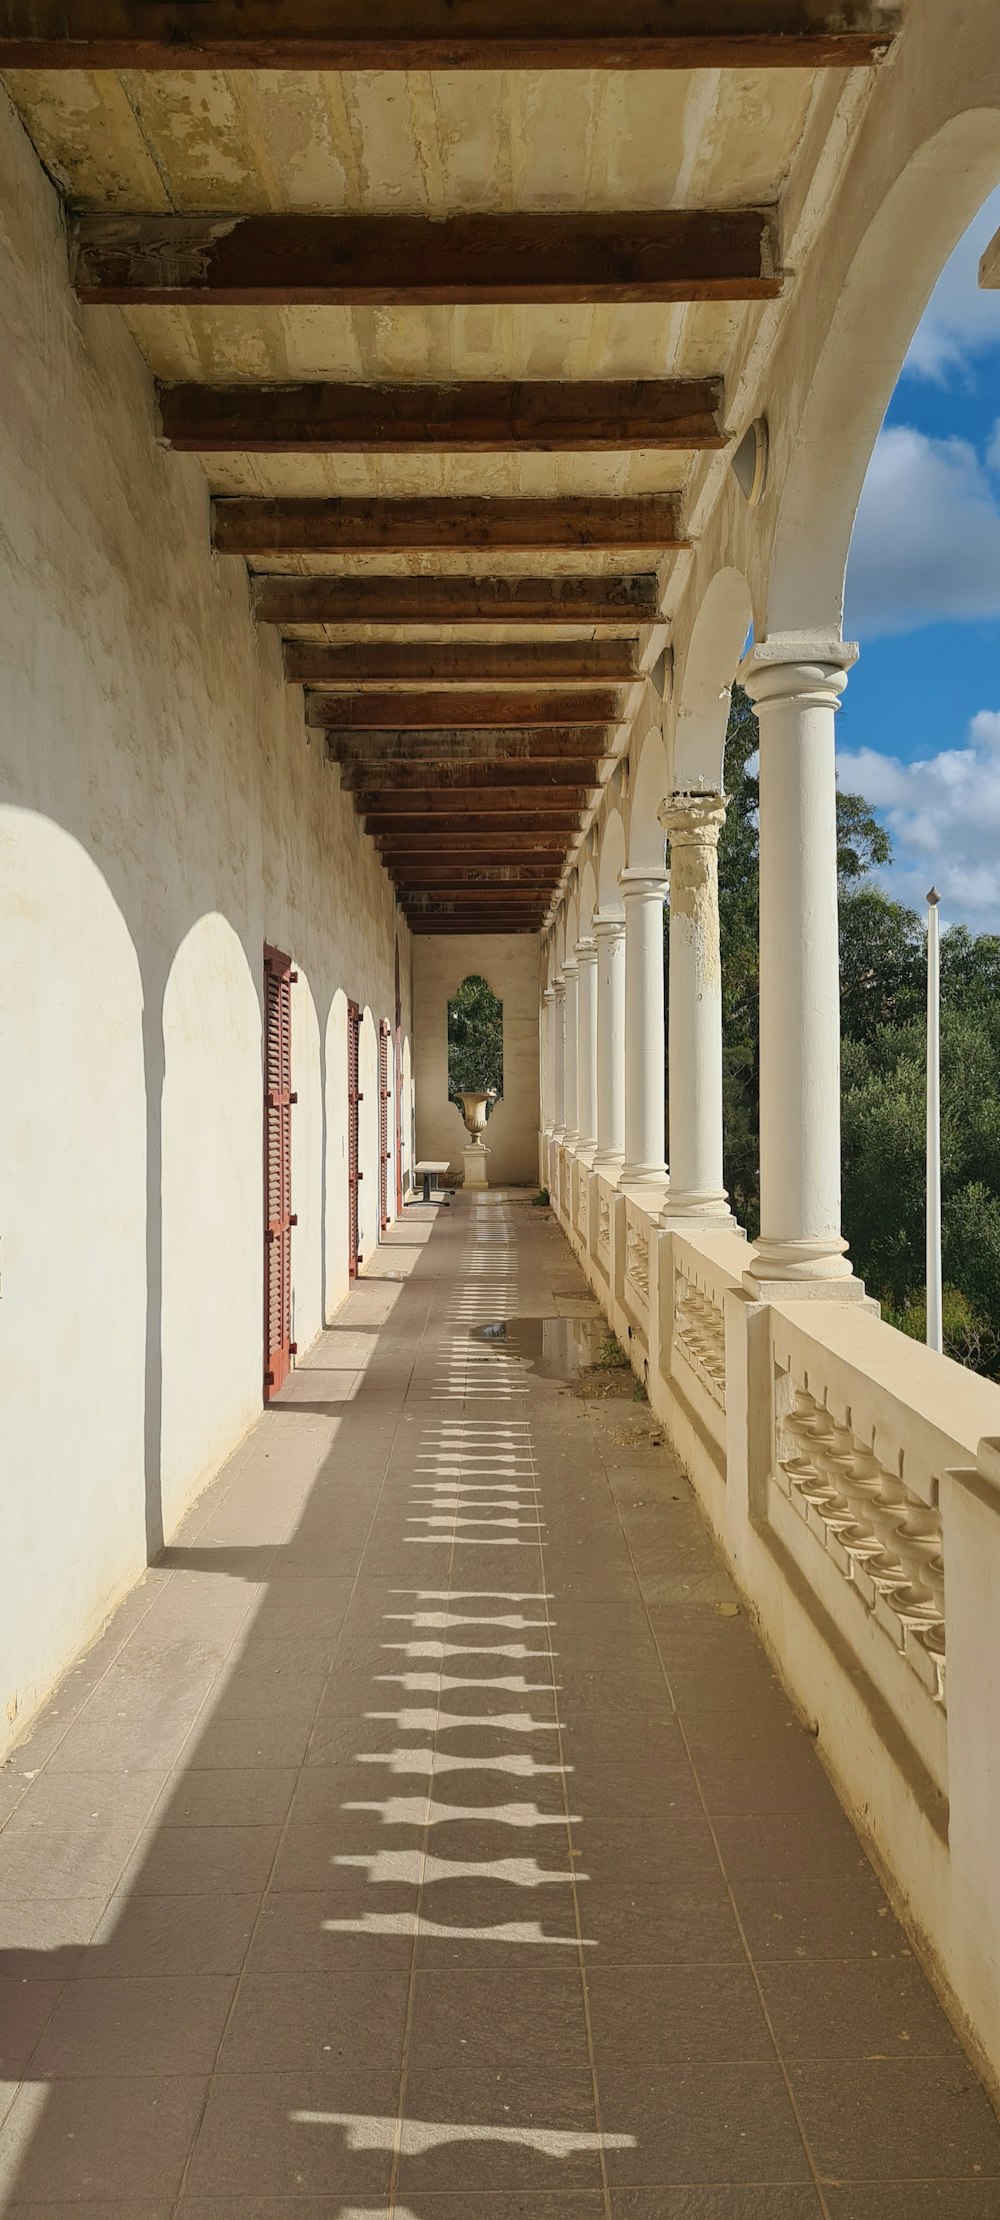 a long walkway lined with columns and pillars